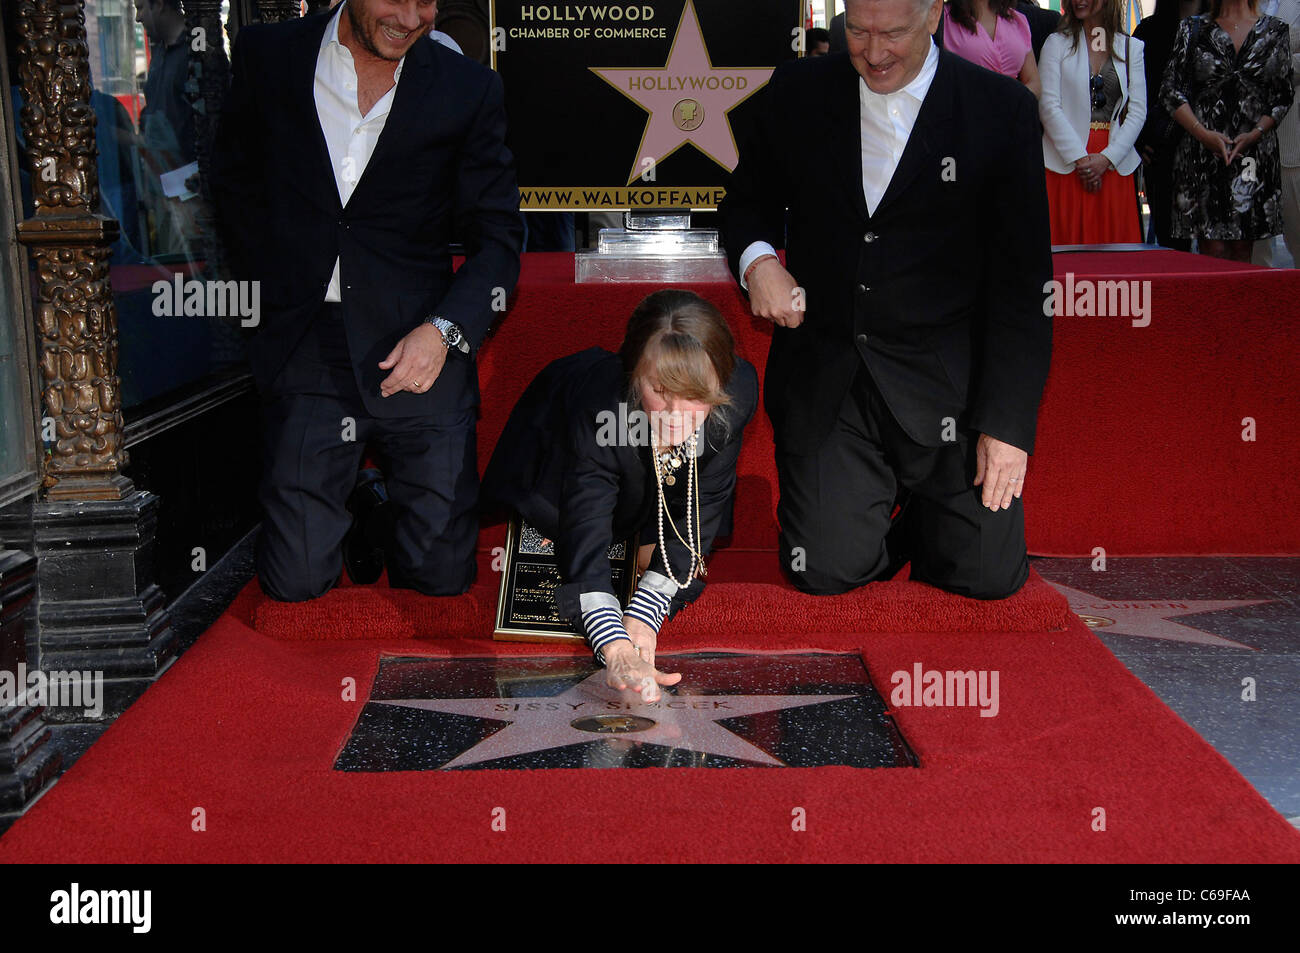 Bill Paxton, Sissy Spacek, David Lynch at the induction ceremony for Star on the Hollywood Walk of Fame Ceremony for Sissy Spacek, Hollywood Boulevard, Los Angeles, CA August 1, 2011. Photo By: Michael Germana/Everett Collection Stock Photo